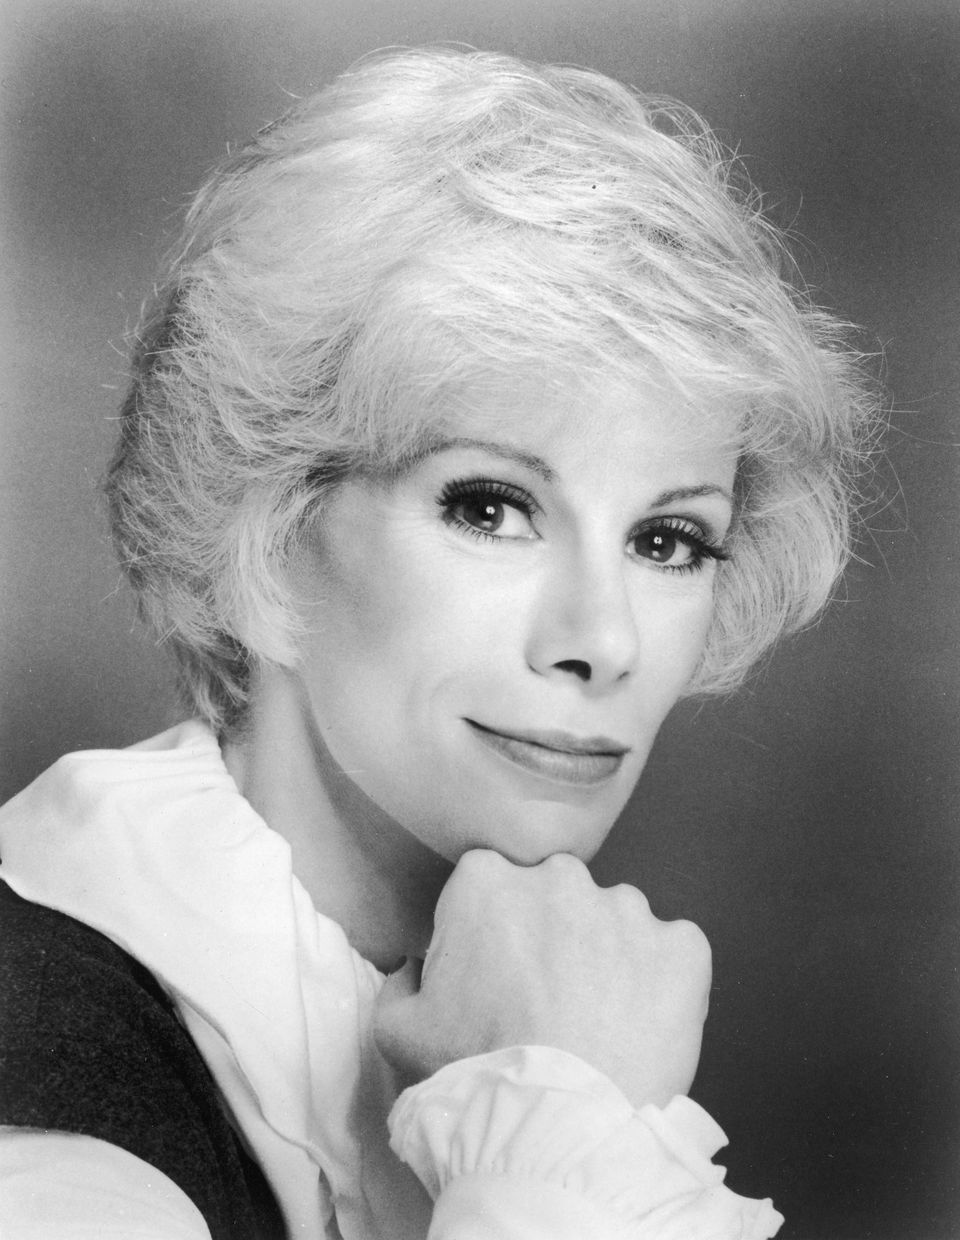 "<a href="http://www.theguardian.com/stage/2012/aug/09/comedy-gold-joan-rivers" role="link" class=" js-entry-link cet-external-link" data-vars-item-name="I hate thin people" data-vars-item-type="text" data-vars-unit-name="5b9e6ce0e4b03a1dcc97847c" data-vars-unit-type="buzz_body" data-vars-target-content-id="http://www.theguardian.com/stage/2012/aug/09/comedy-gold-joan-rivers" data-vars-target-content-type="url" data-vars-type="web_external_link" data-vars-subunit-name="before_you_go_slideshow" data-vars-subunit-type="component" data-vars-position-in-subunit="9">I hate thin people</a>; 'Oh, does the tampon make me look fat?'"